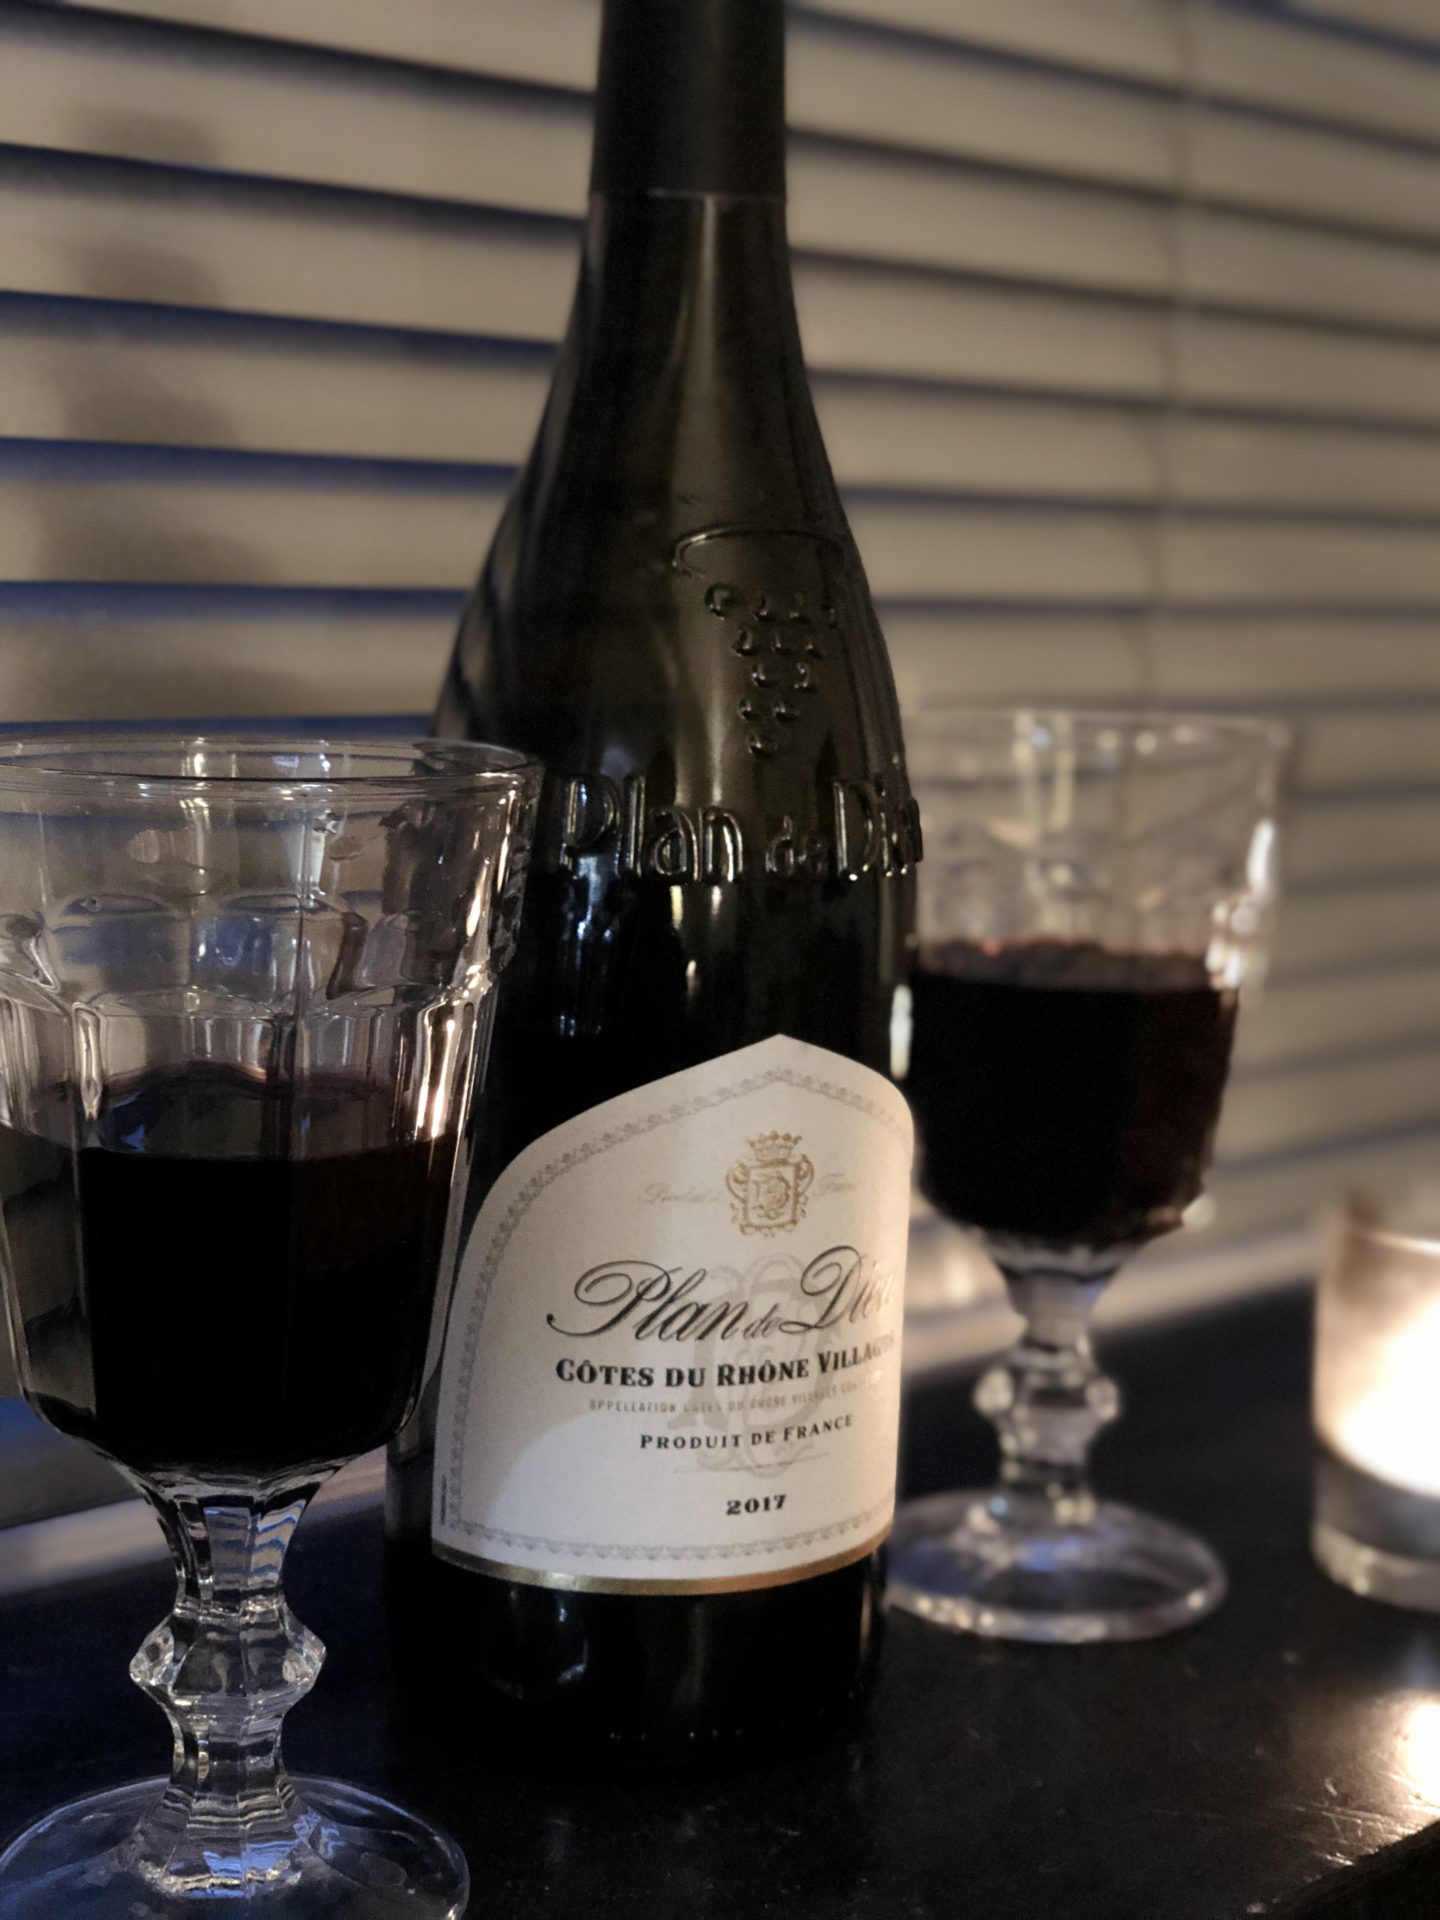 wines for winter with Asda : Plan de Dieu, from the Cotes du Rhone Villages